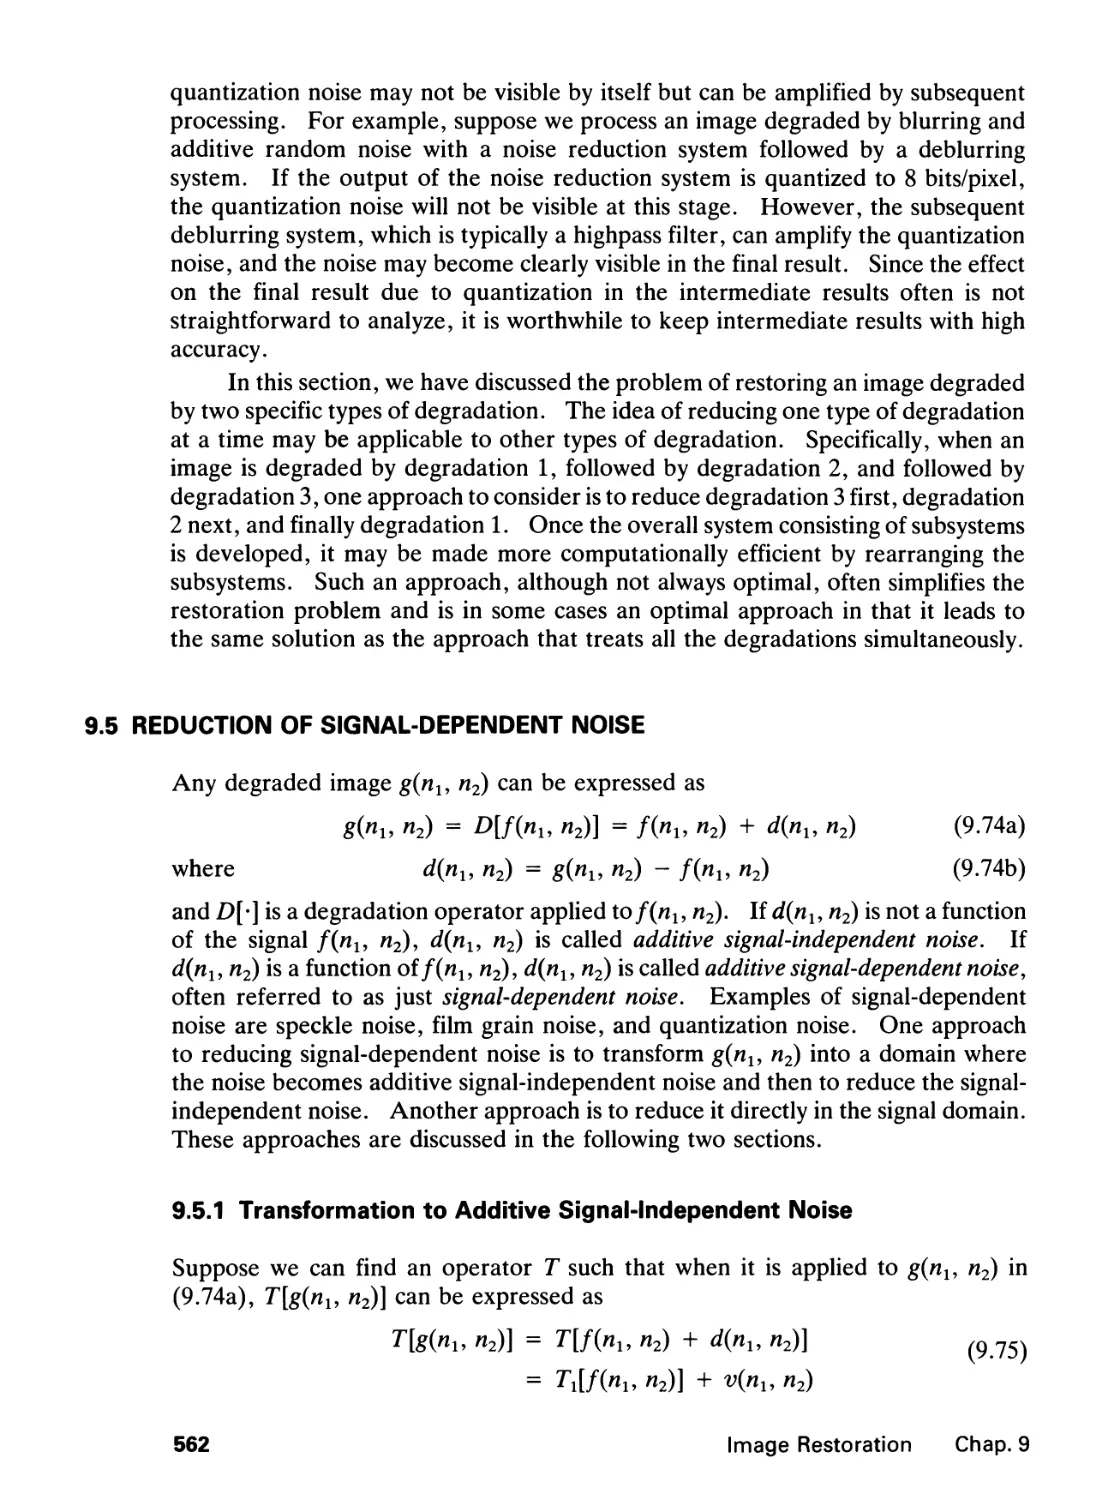 9.5 Reduction of Signal-Dependent Noise